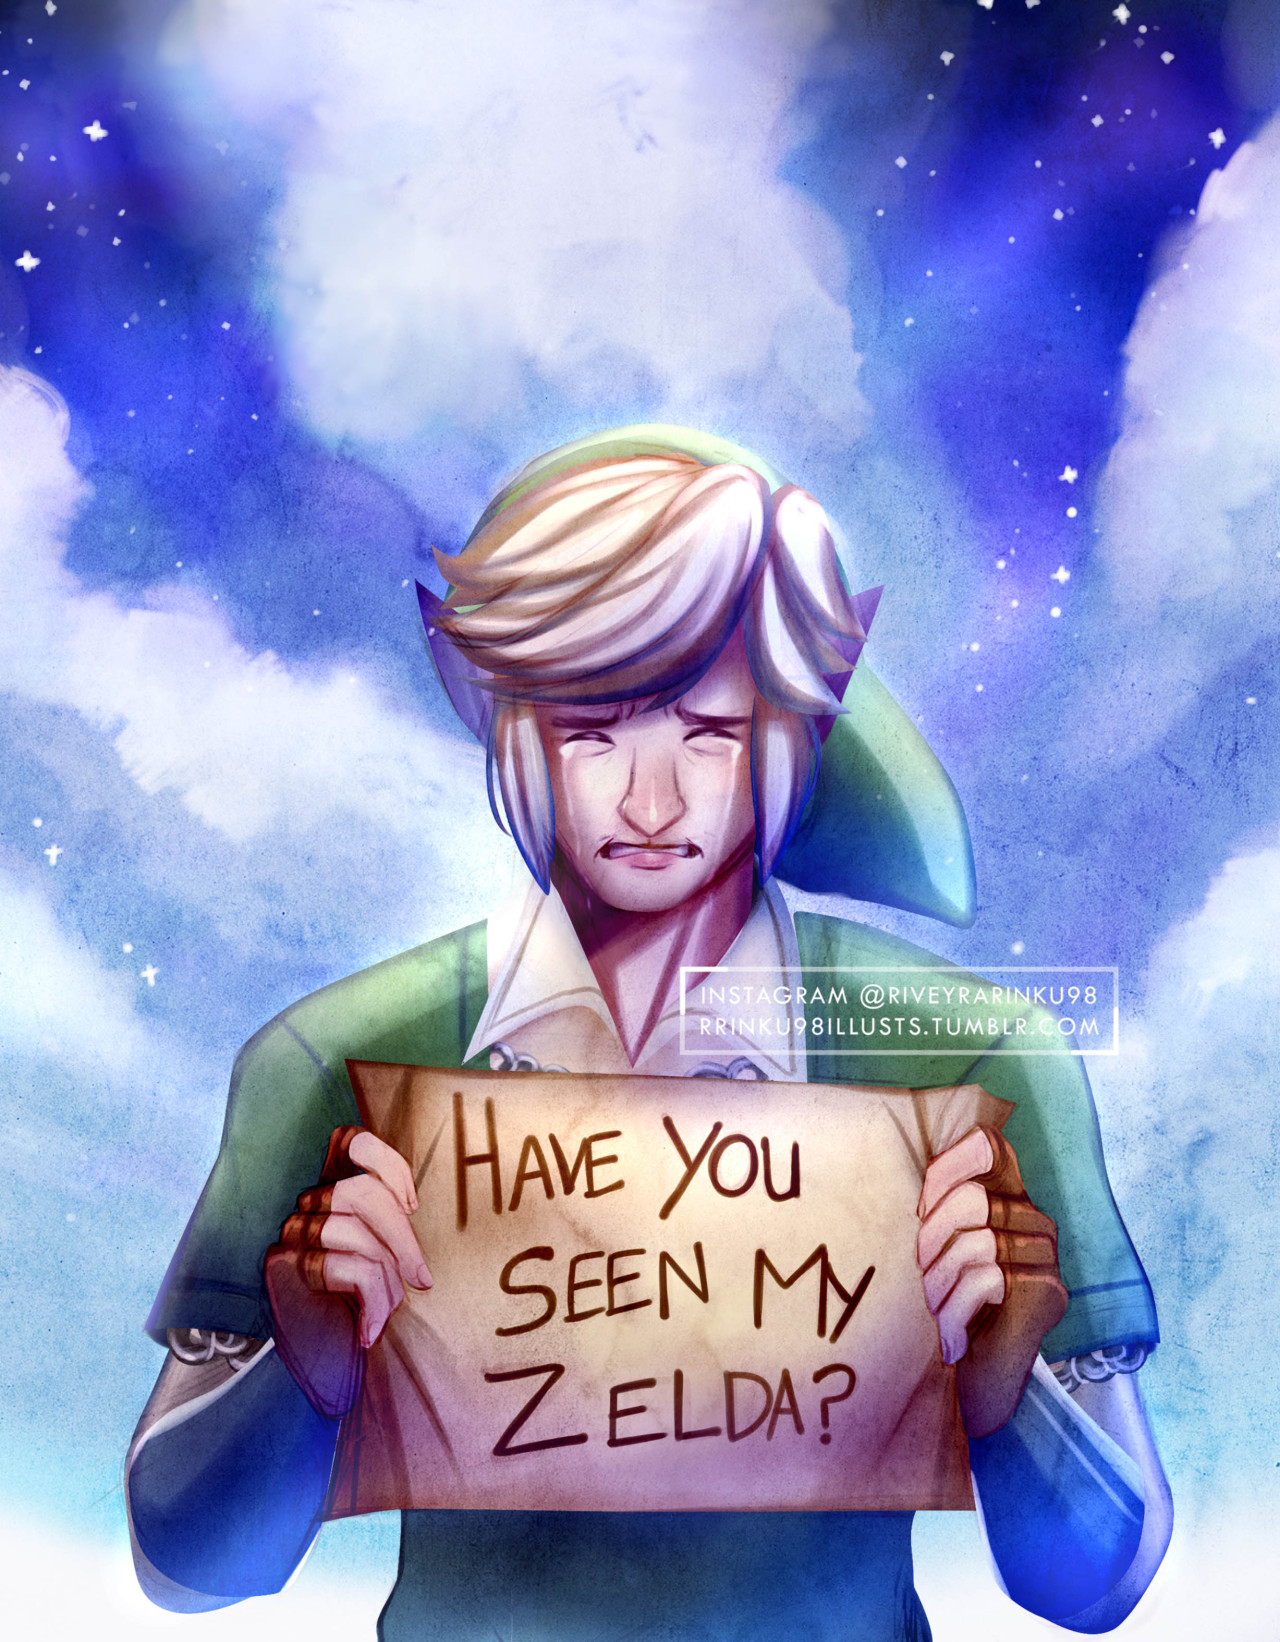 Same energy when I was lost in a mall tho.--Originally from December, just finished it today! #Skyward Sword #skyward sword link  #legend of zelda  #the legend of zelda #ss link#digital painting#2022art